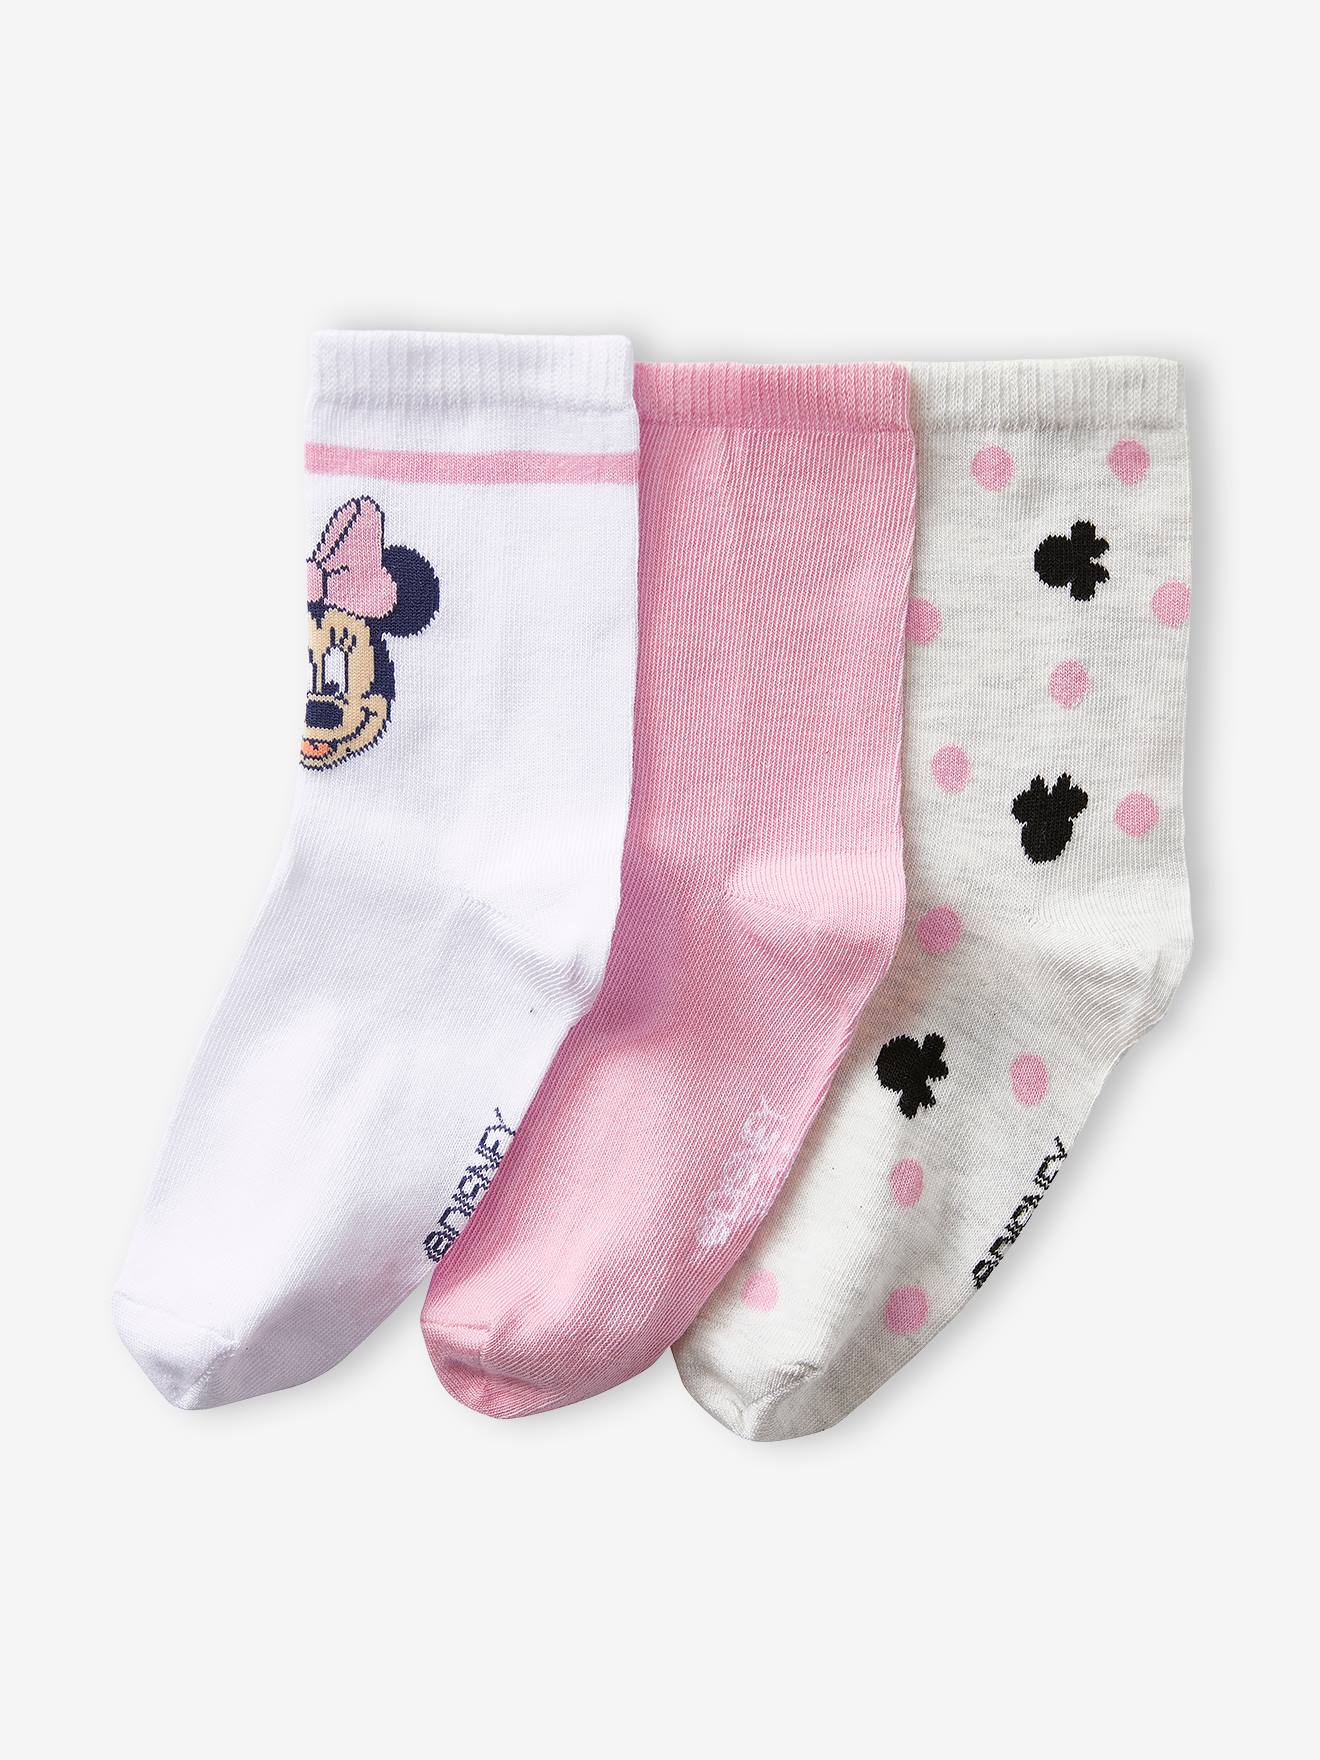 Pack of 3 Pairs of Minnie Mouse Socks by Disney(r) pink medium solid